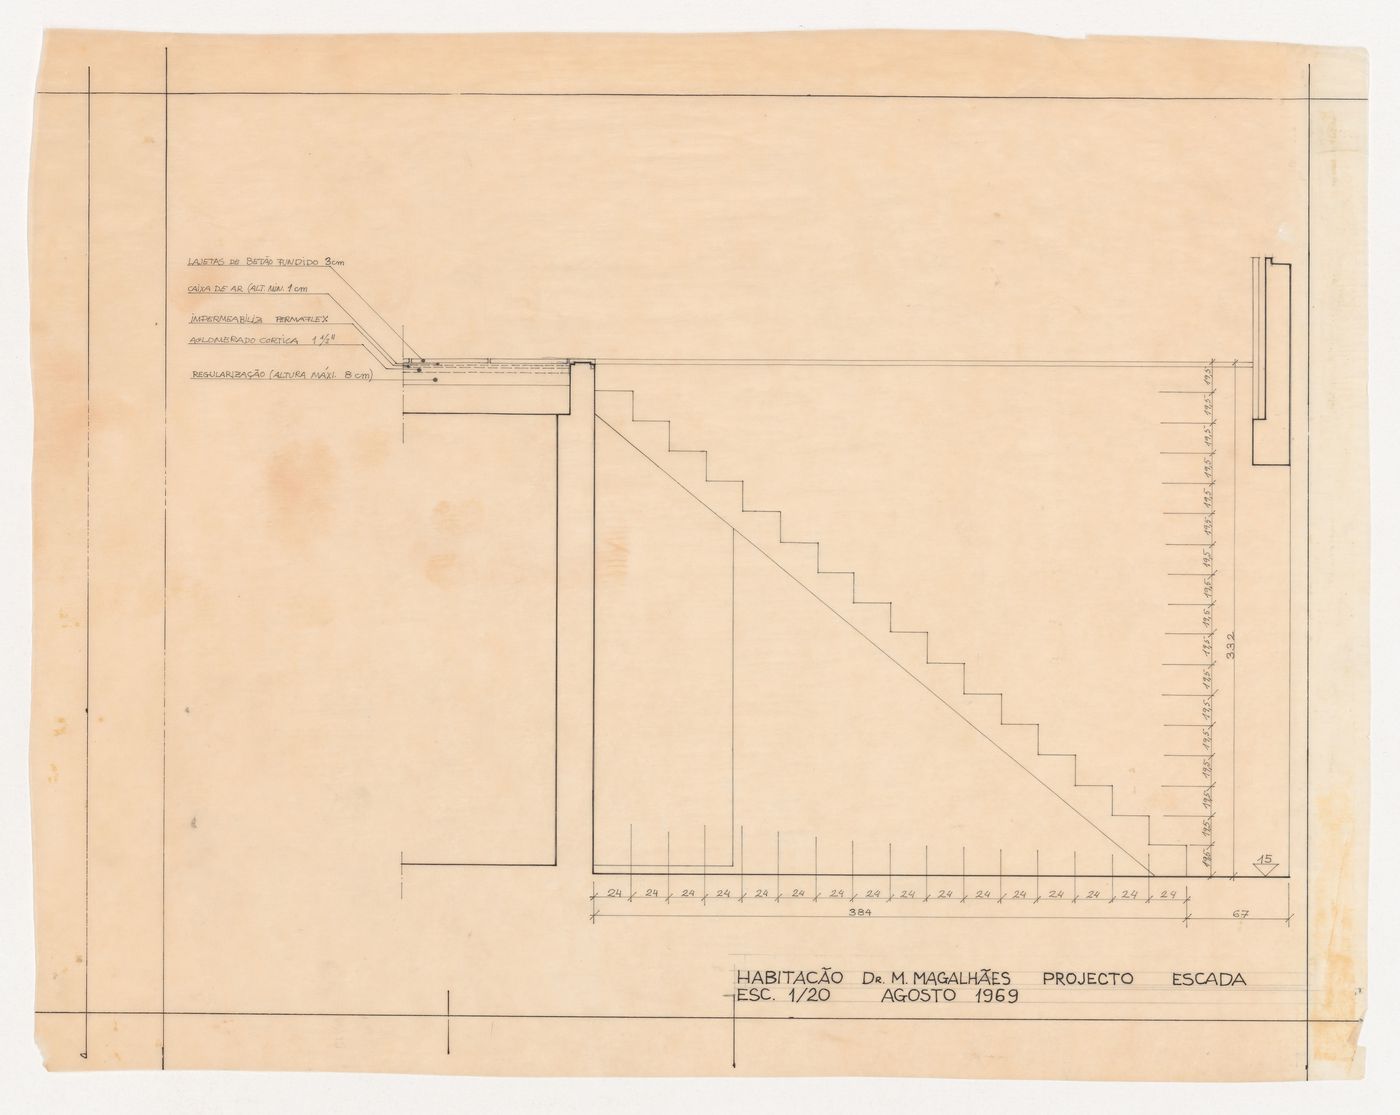 Elevation for stairs for Casa Manuel Magalhães, Porto